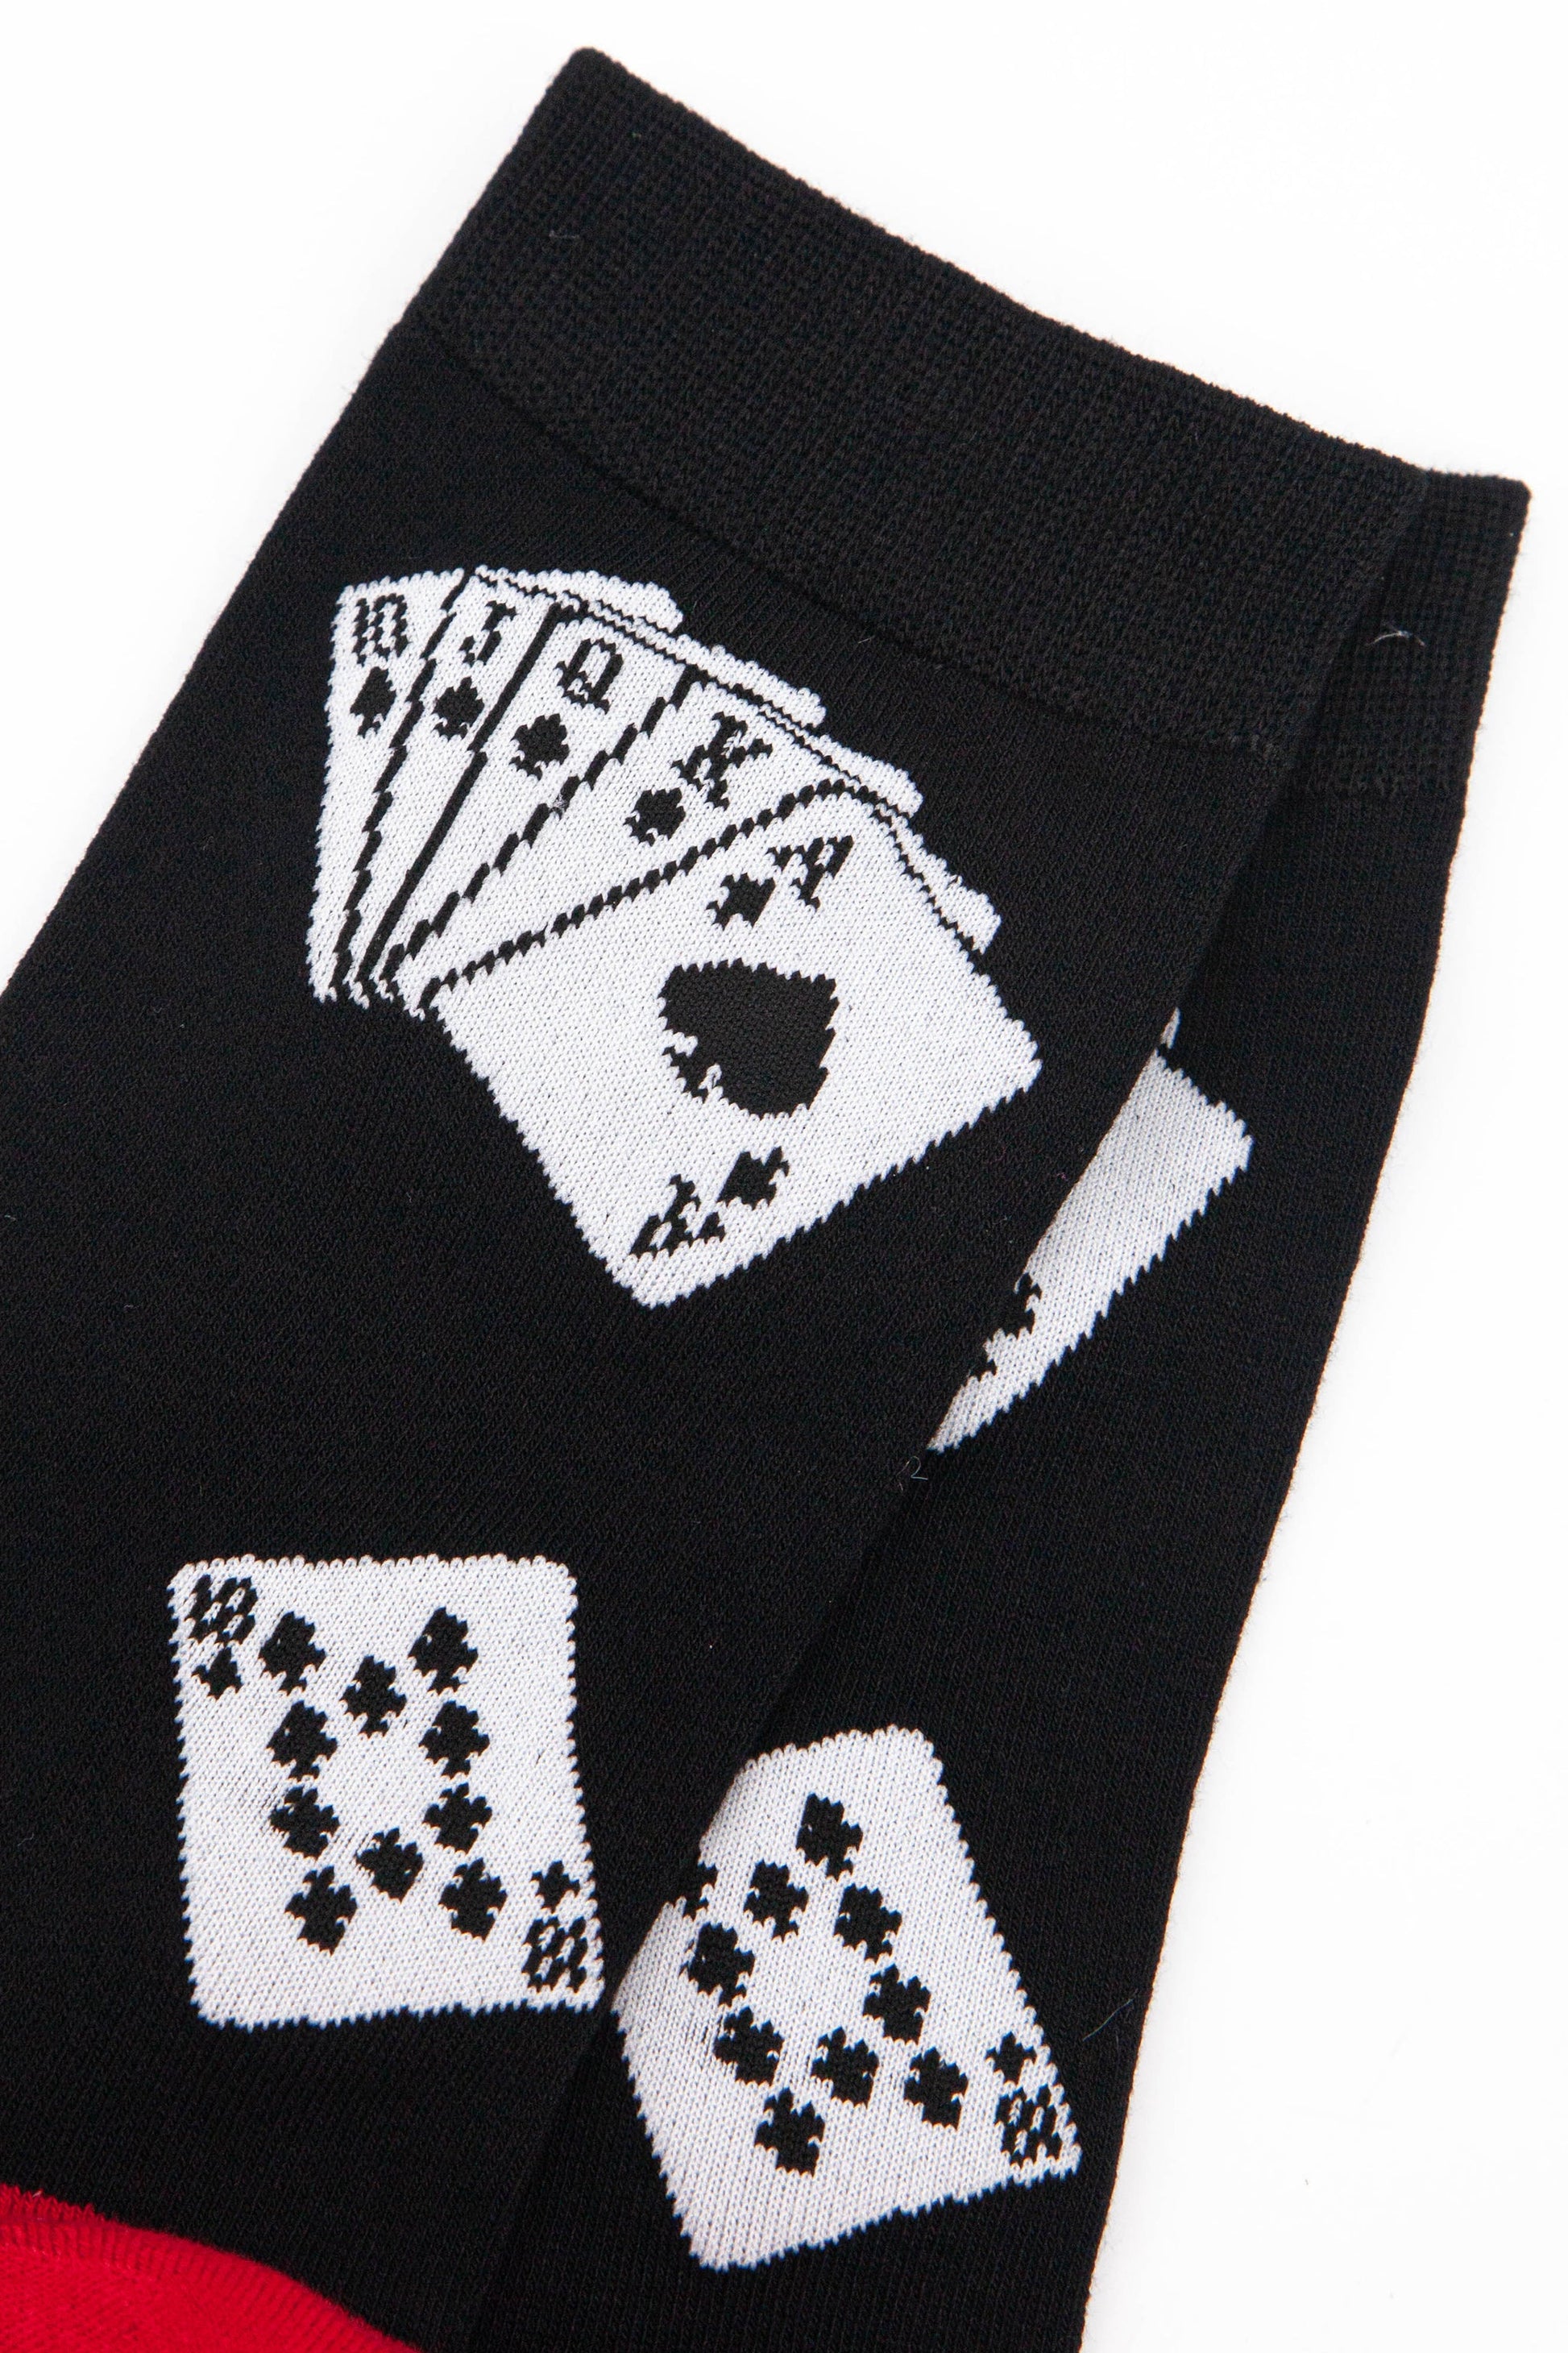 close up of a royal flush hand of cards on the ankle of the bamboo socks